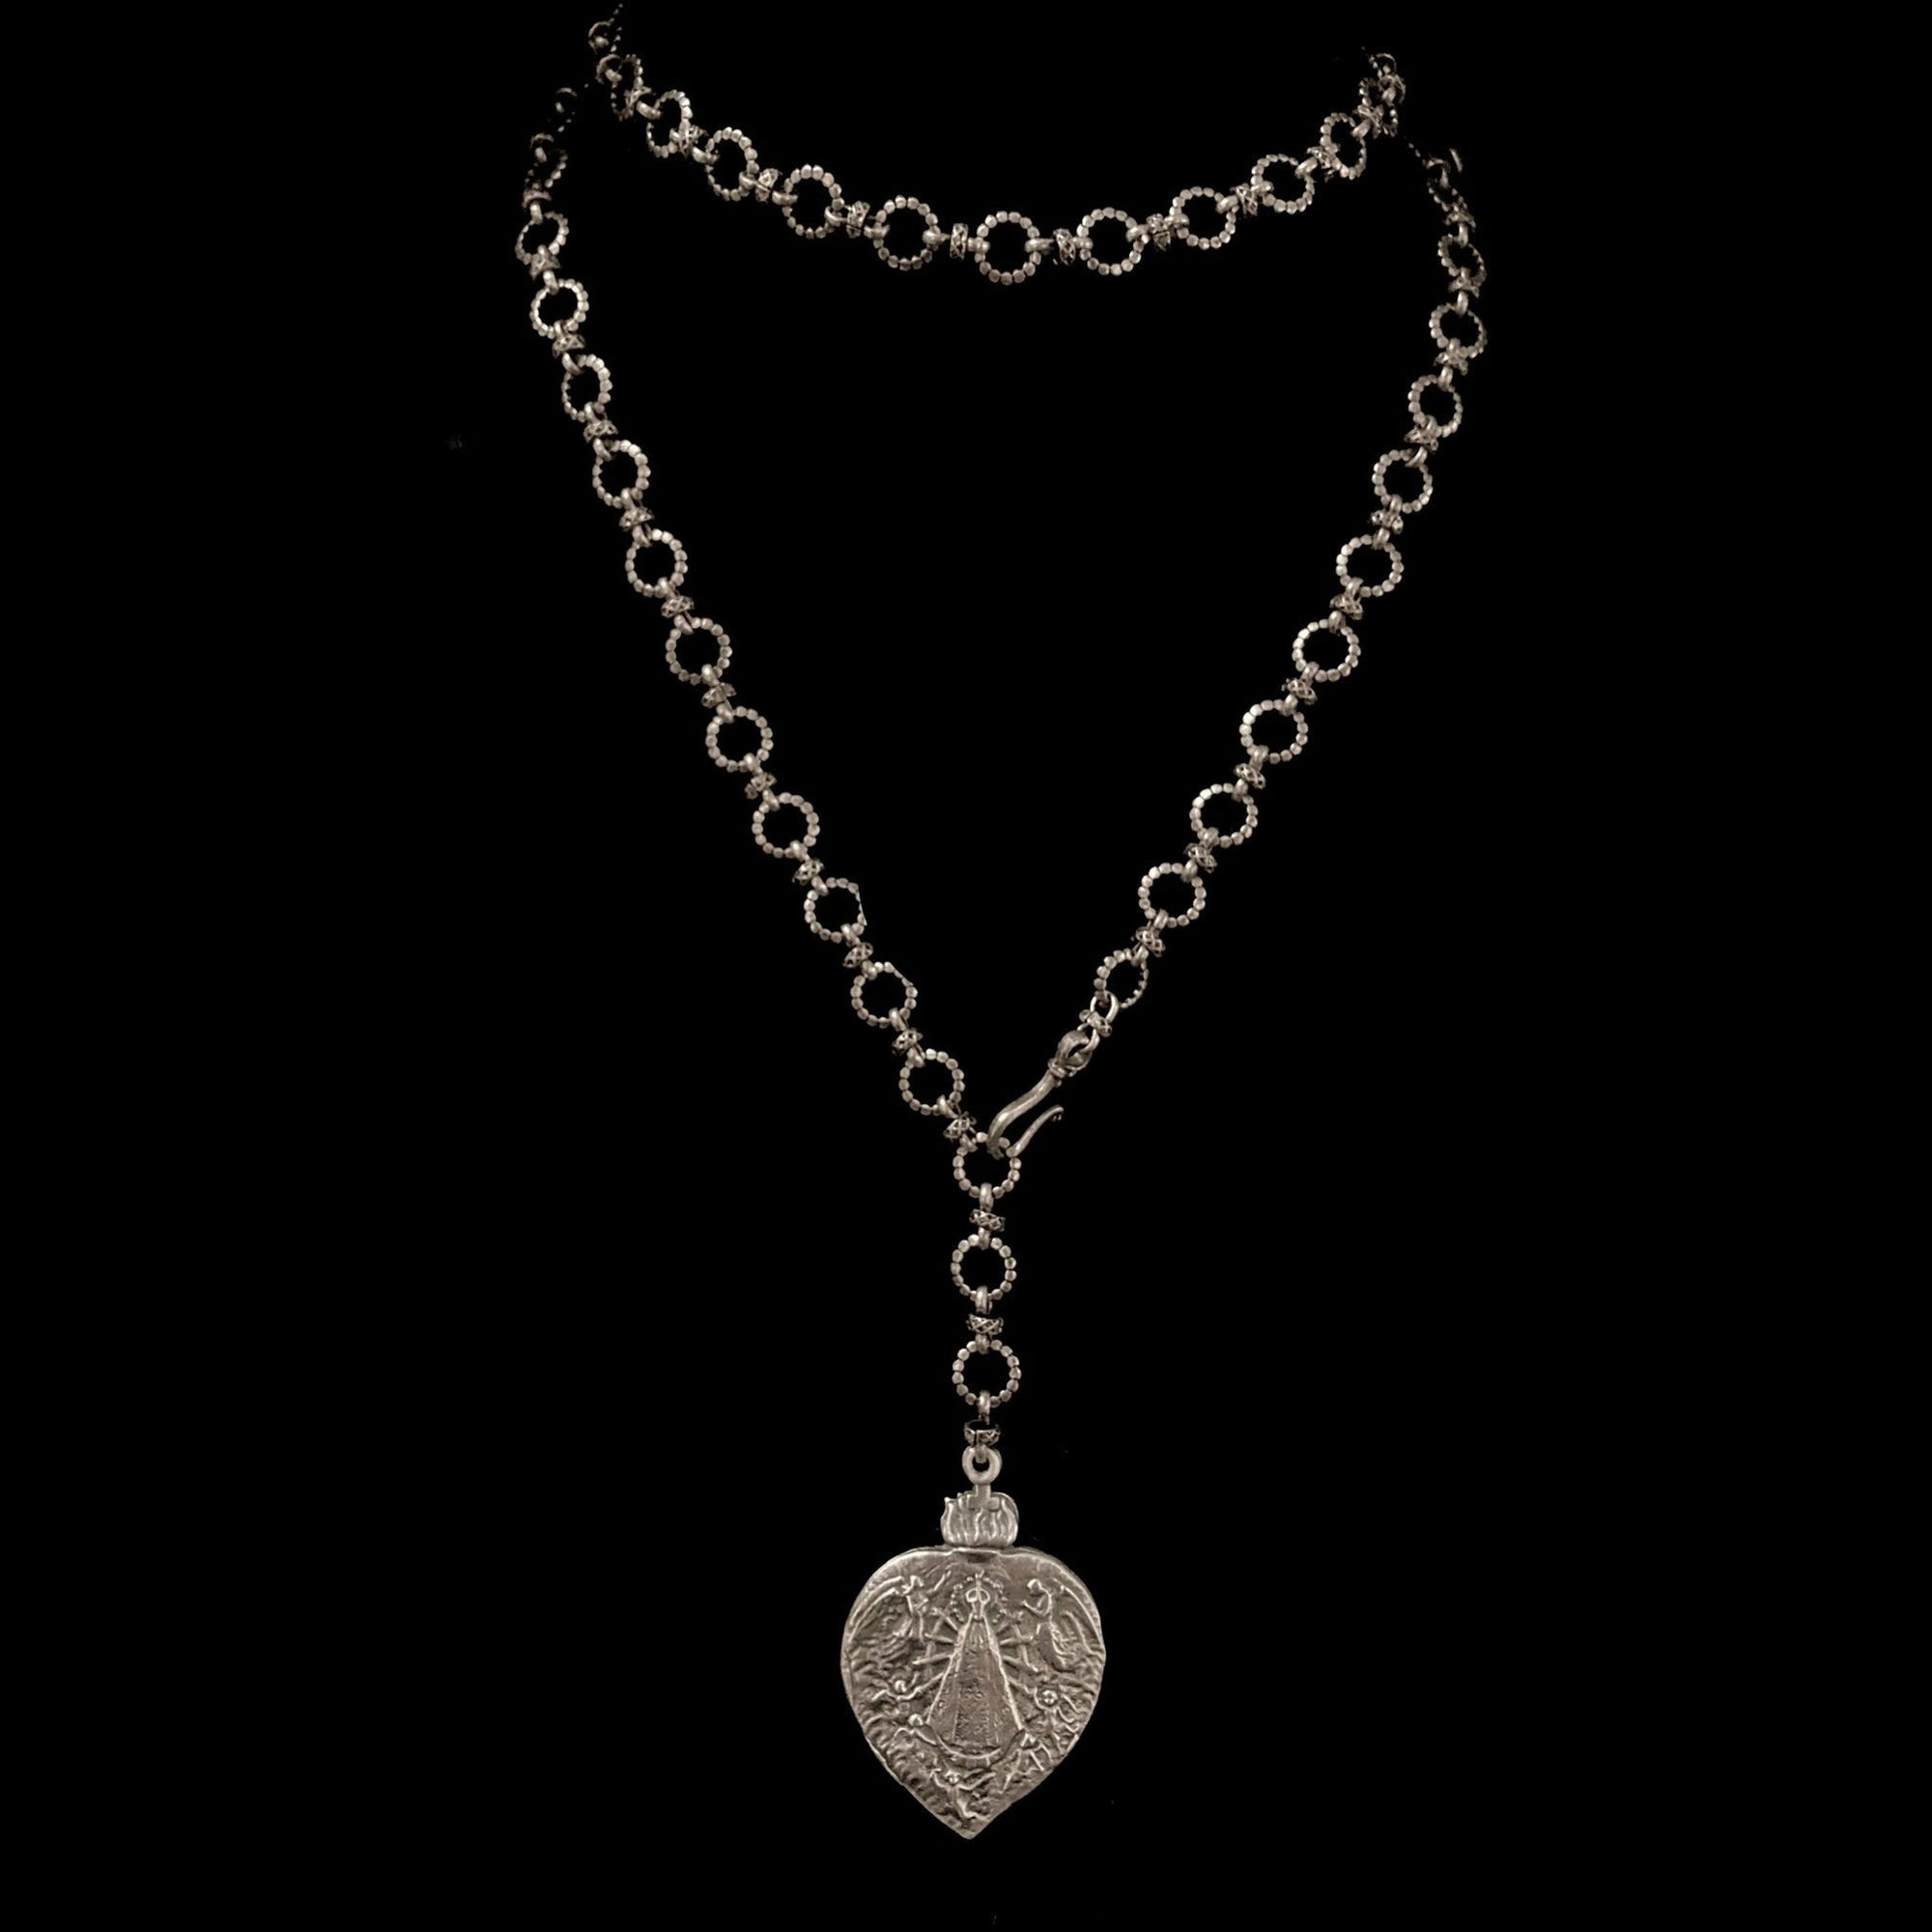 Our Lady of Lujan Eternity Link Chain Necklace - Silver